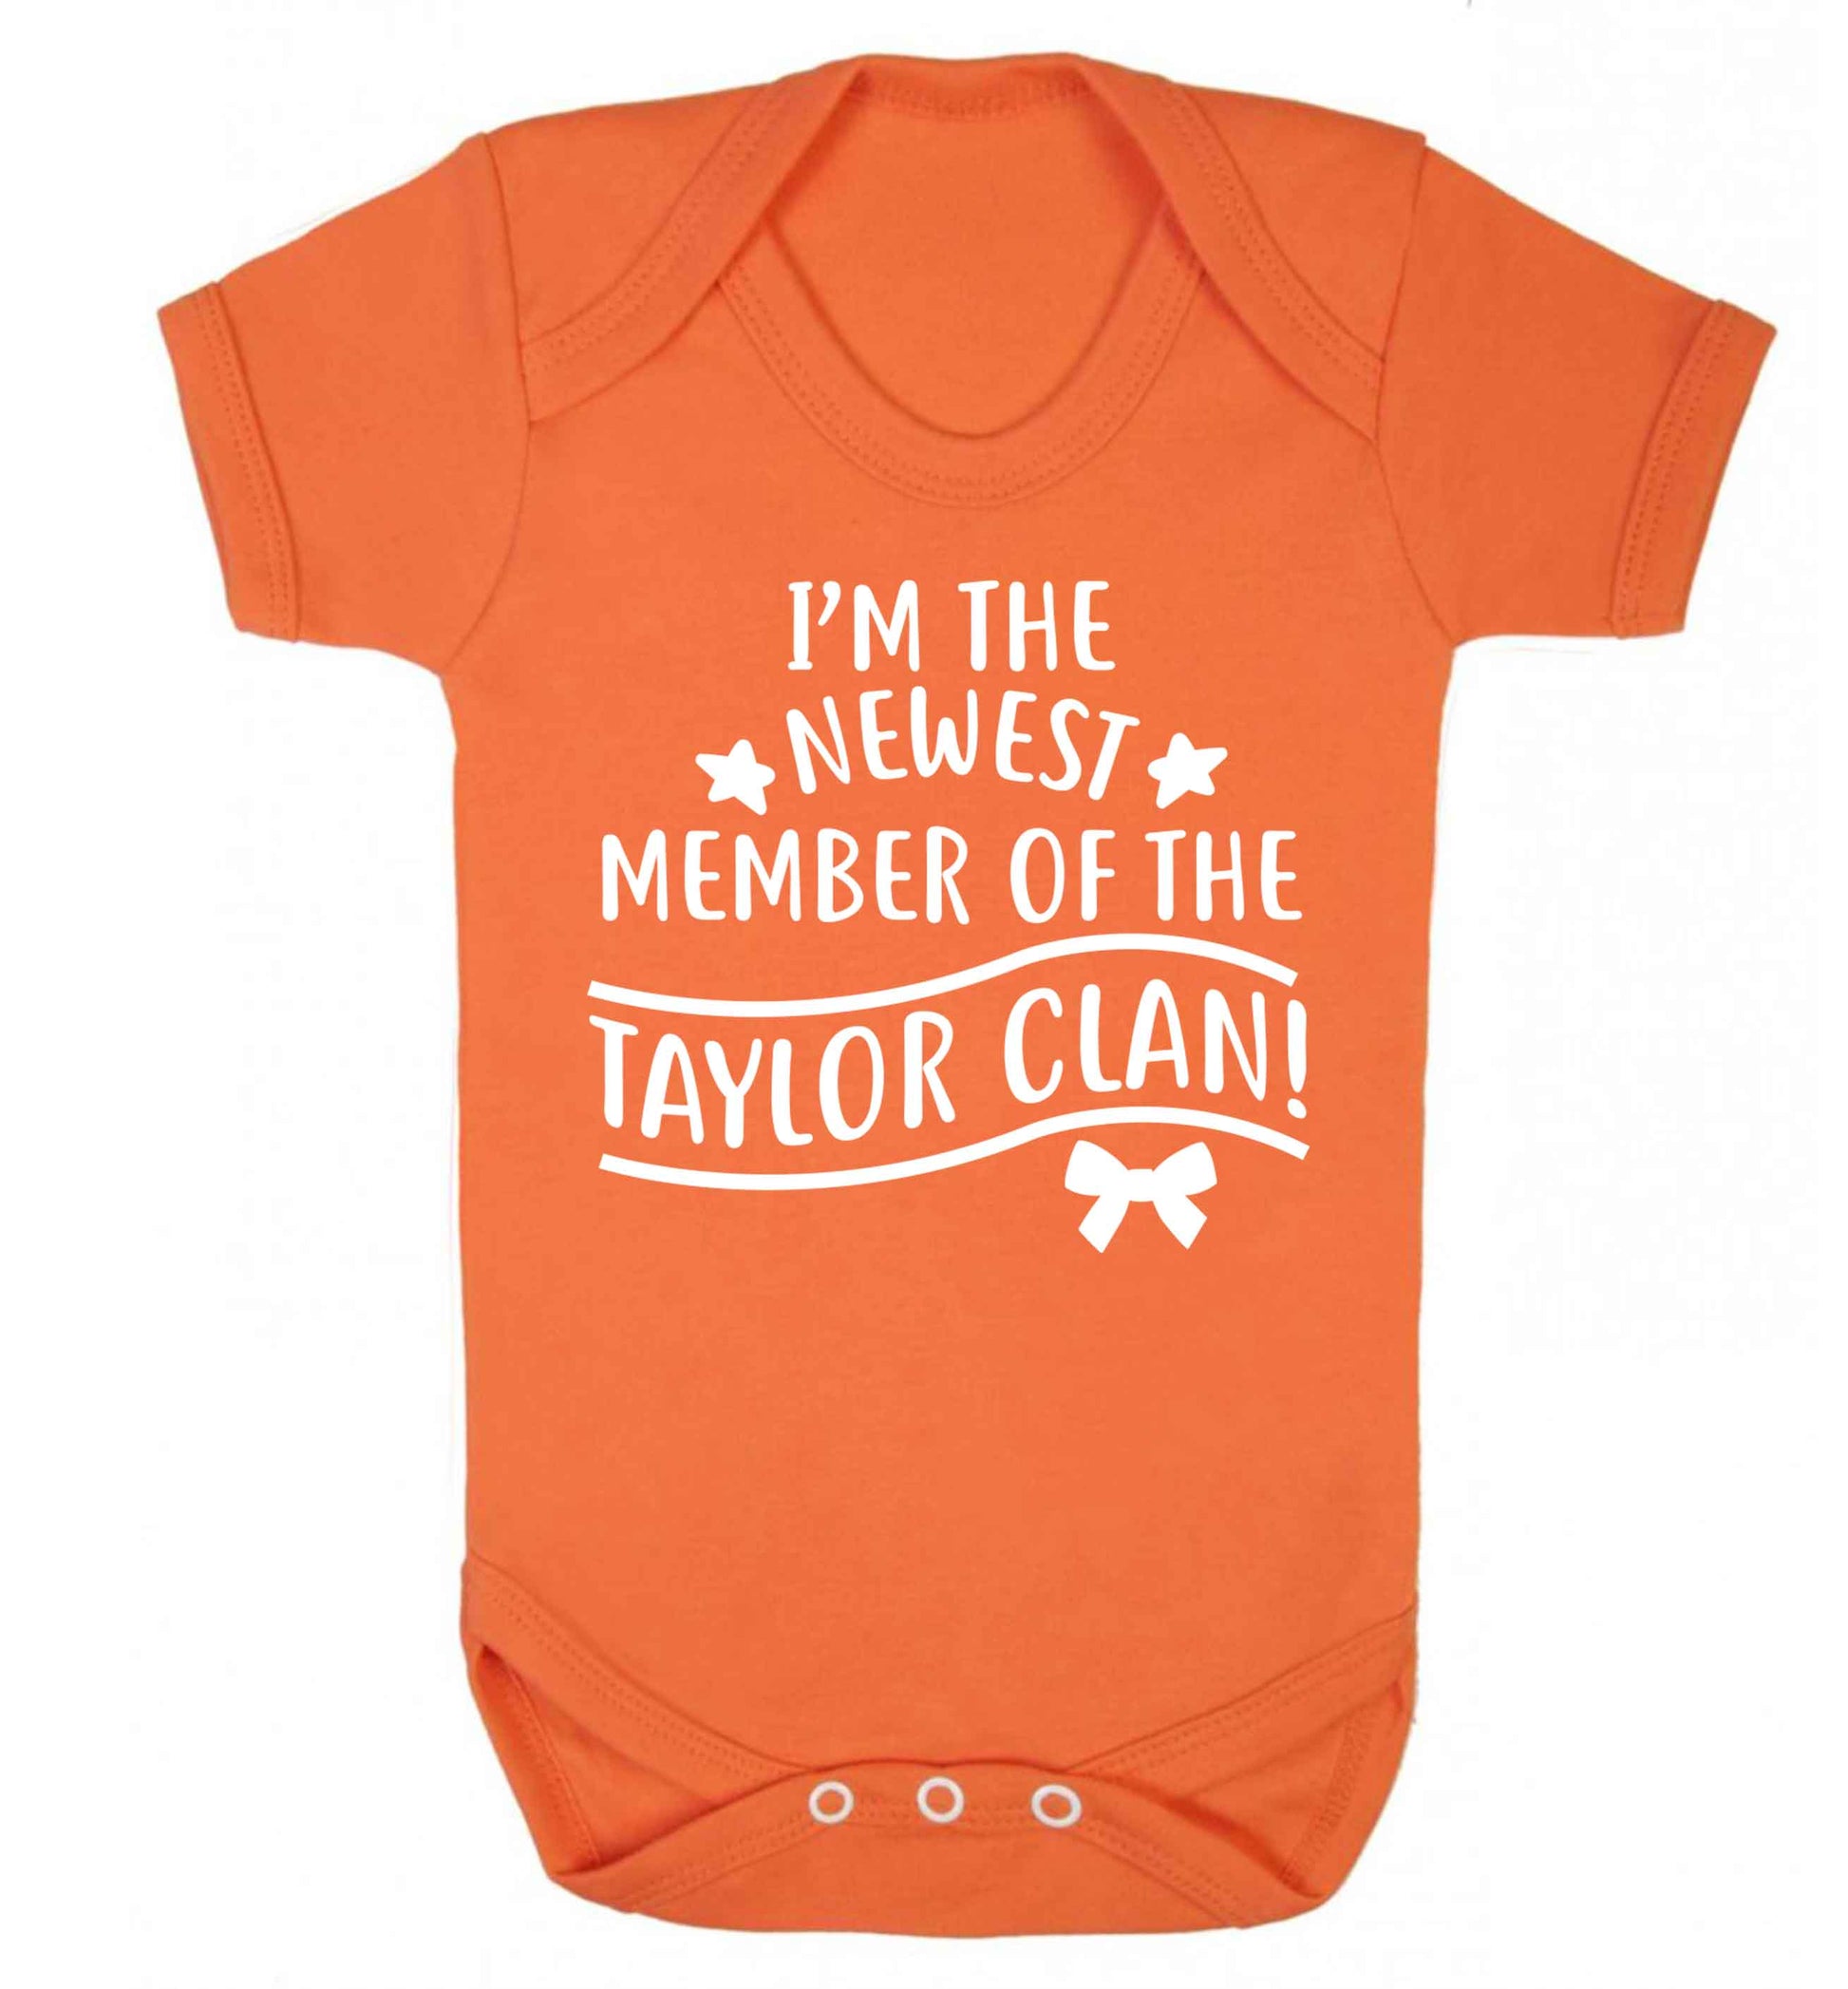 Personalised, newest member of the Taylor clan Baby Vest orange 18-24 months